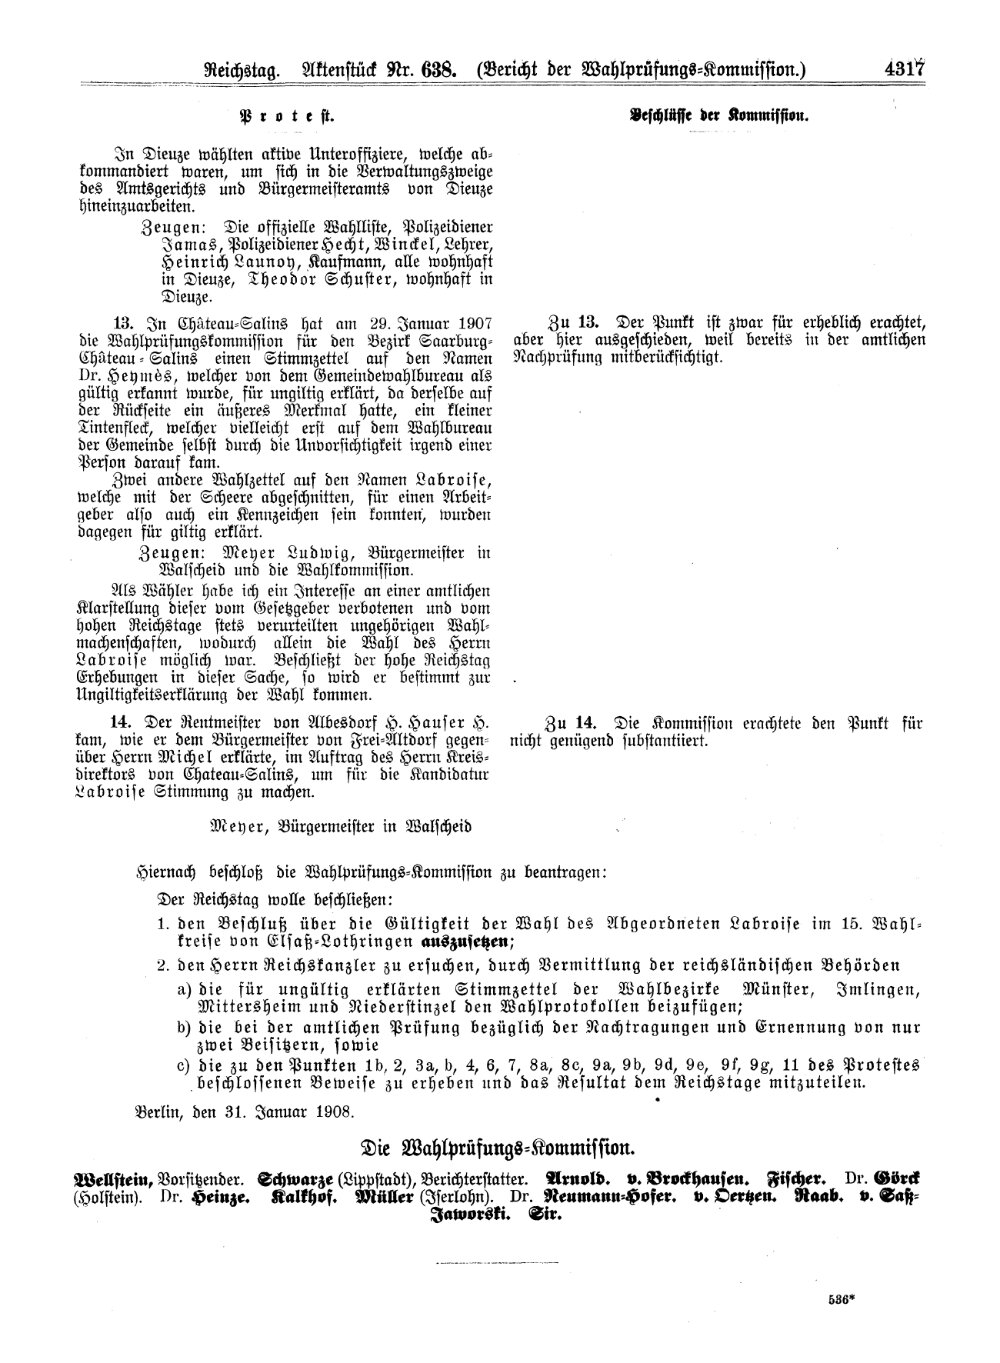 Scan of page 4317